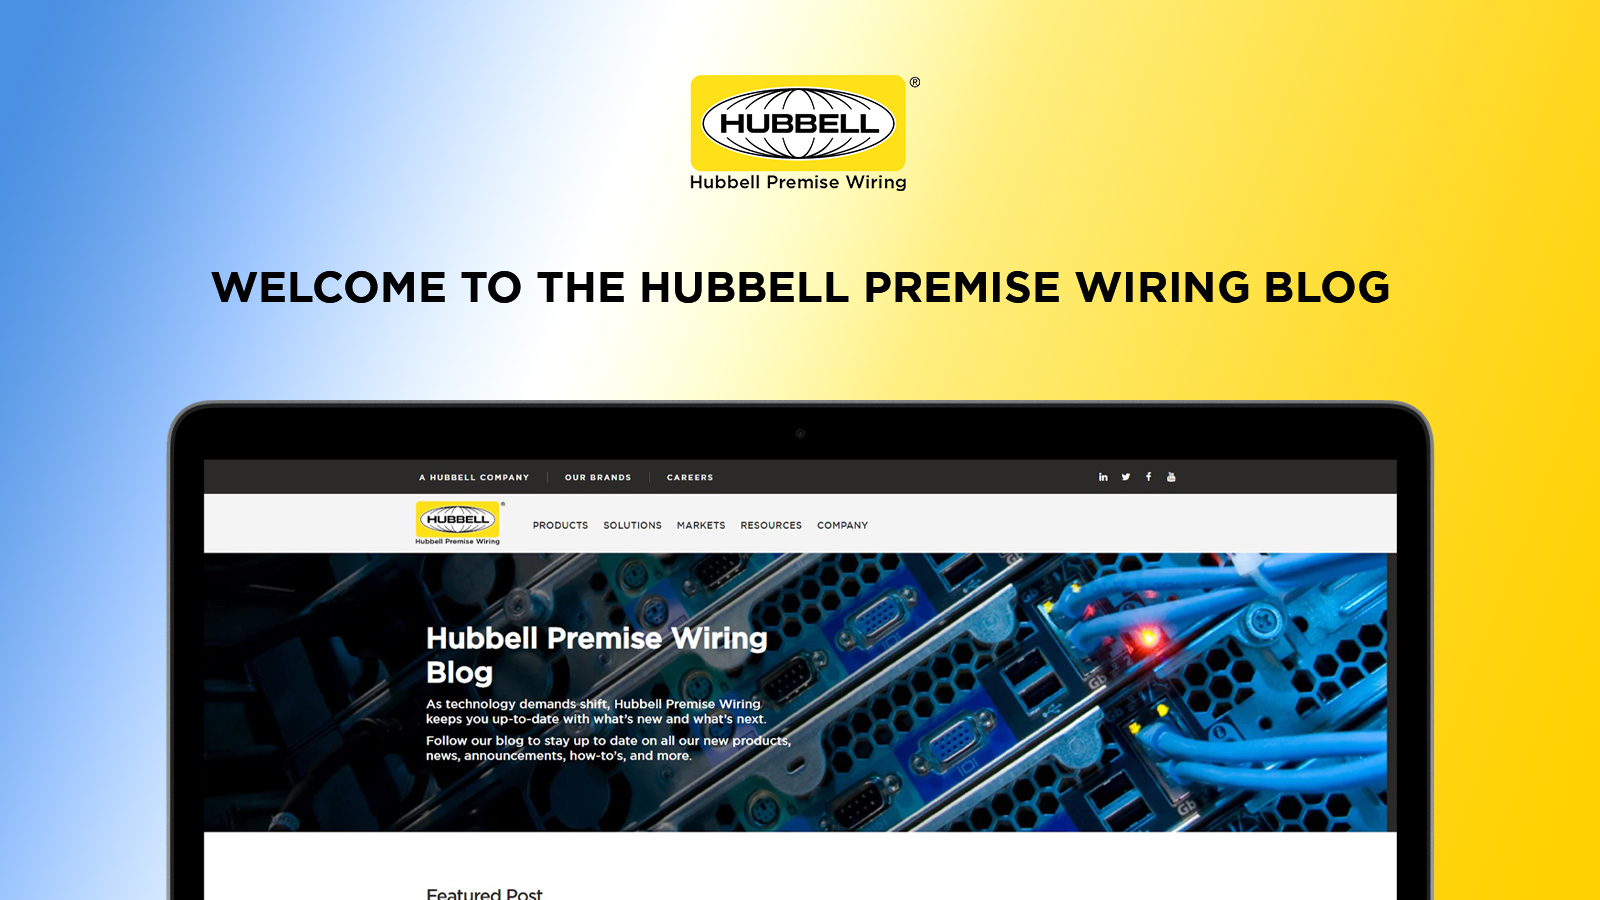 Welcome to the Hubbell Premise Wiring Blog